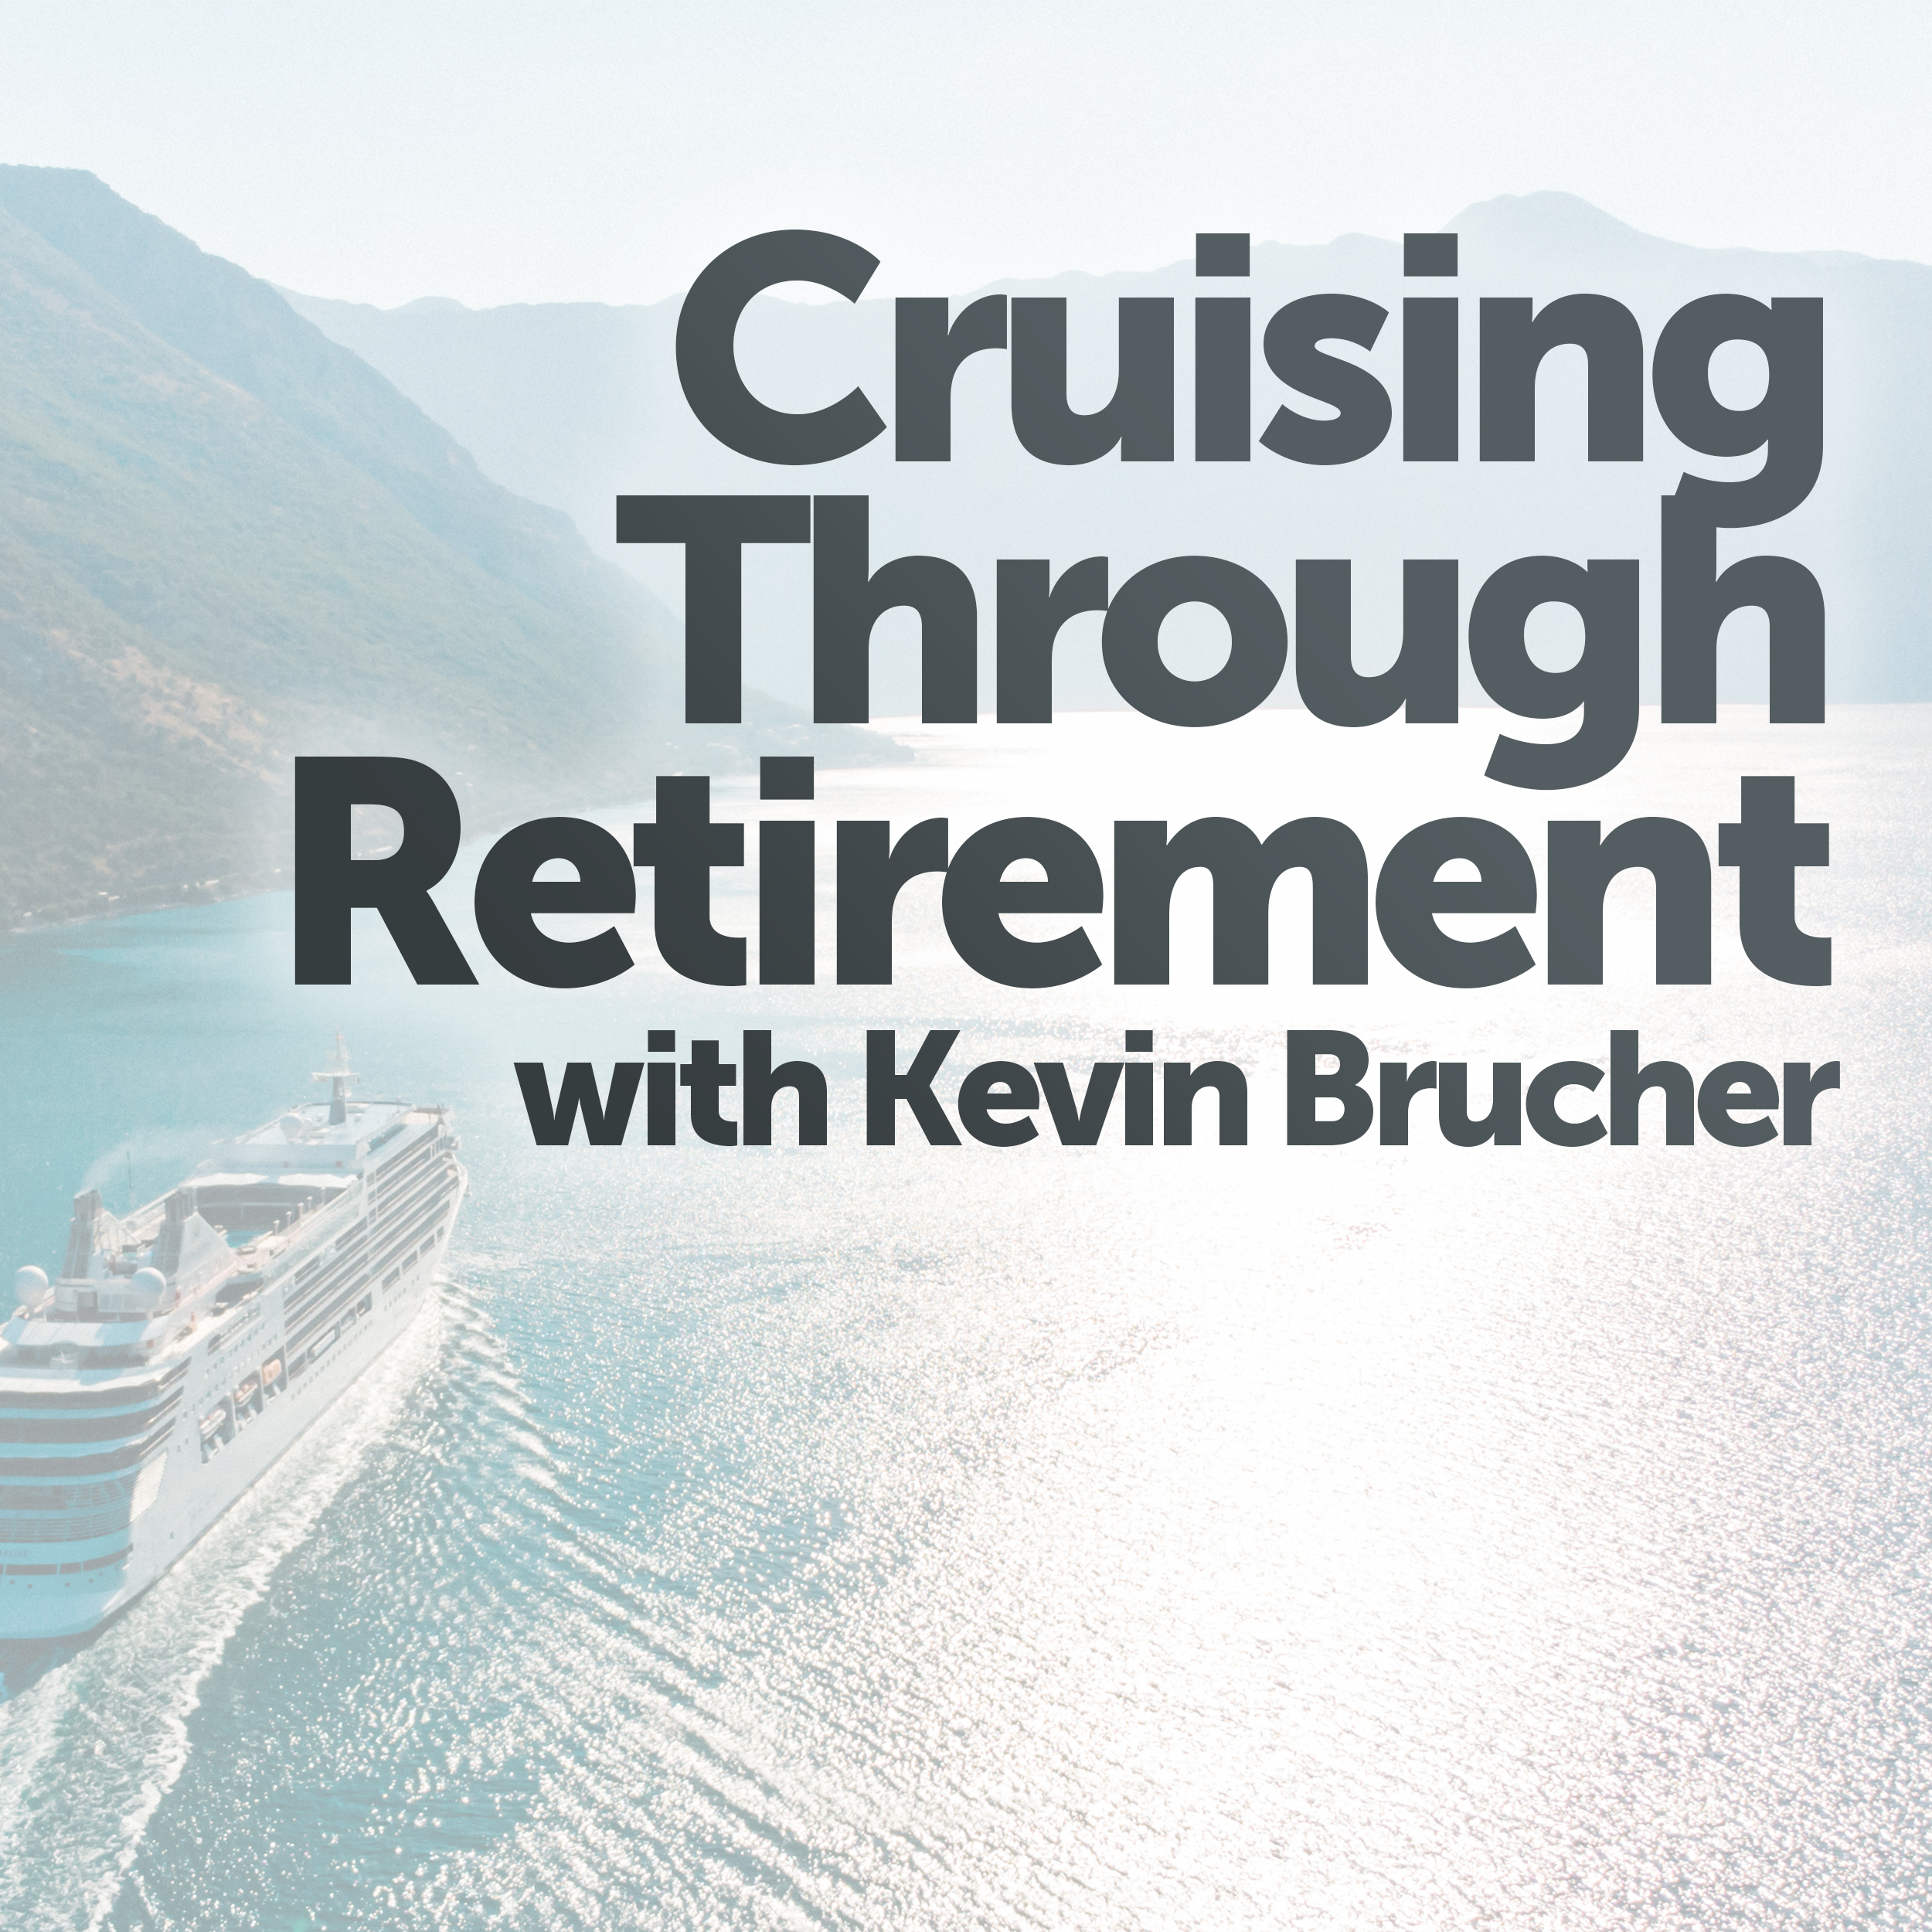 Kevin Brooker discusses various topics related to retirement planning and taxation.